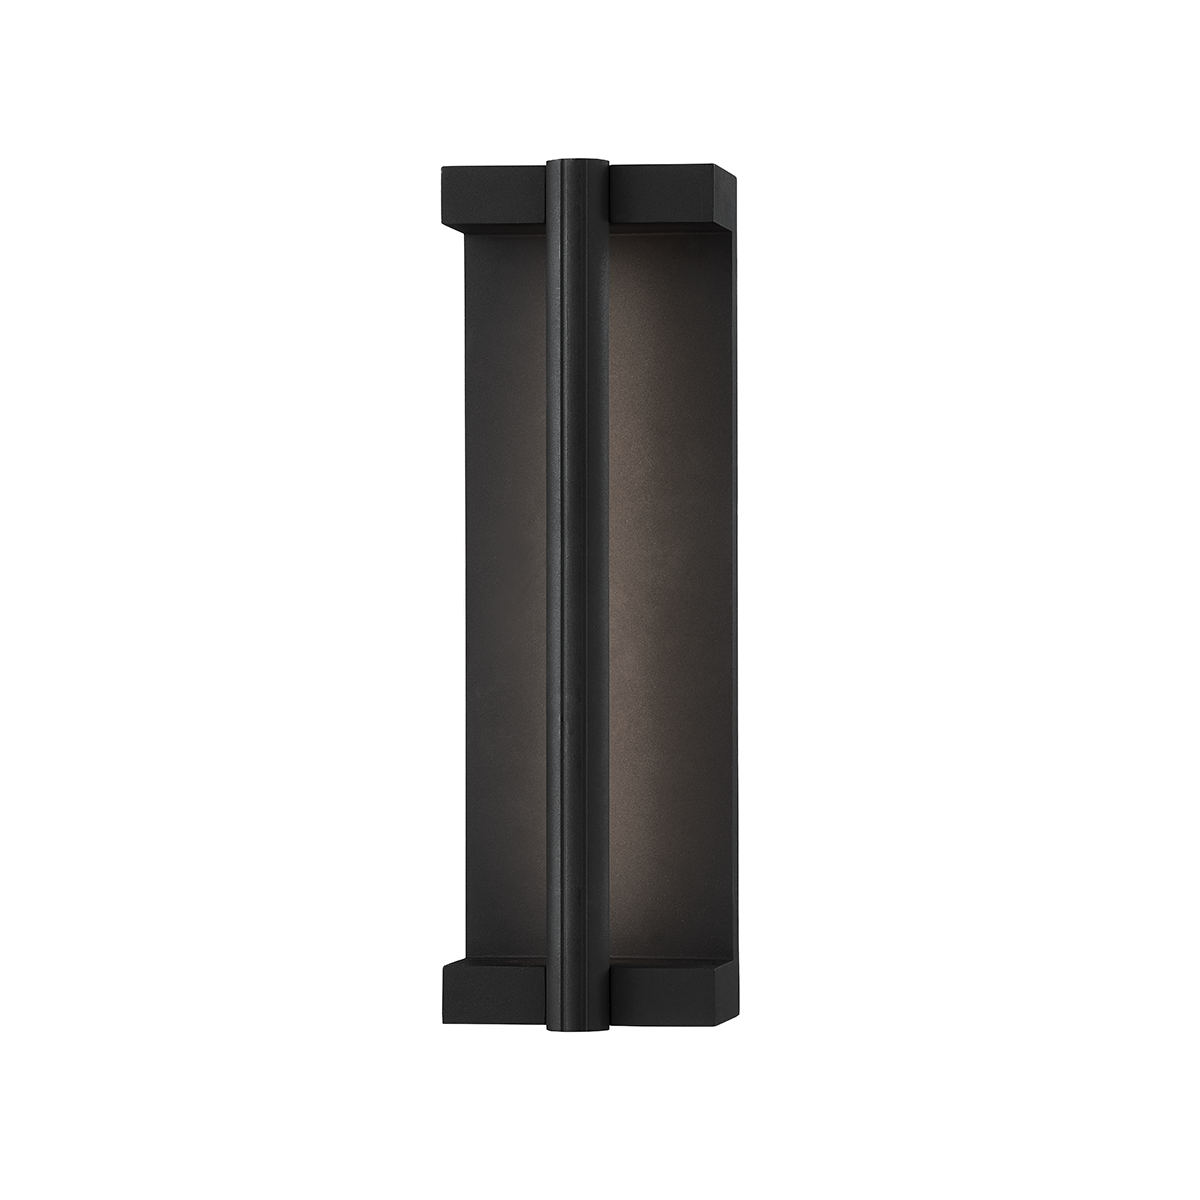 Troy CALLA 1 LIGHT SMALL EXTERIOR WALL SCONCE B1251 Outdoor l Wall Troy Lighting TEXTURE BLACK  